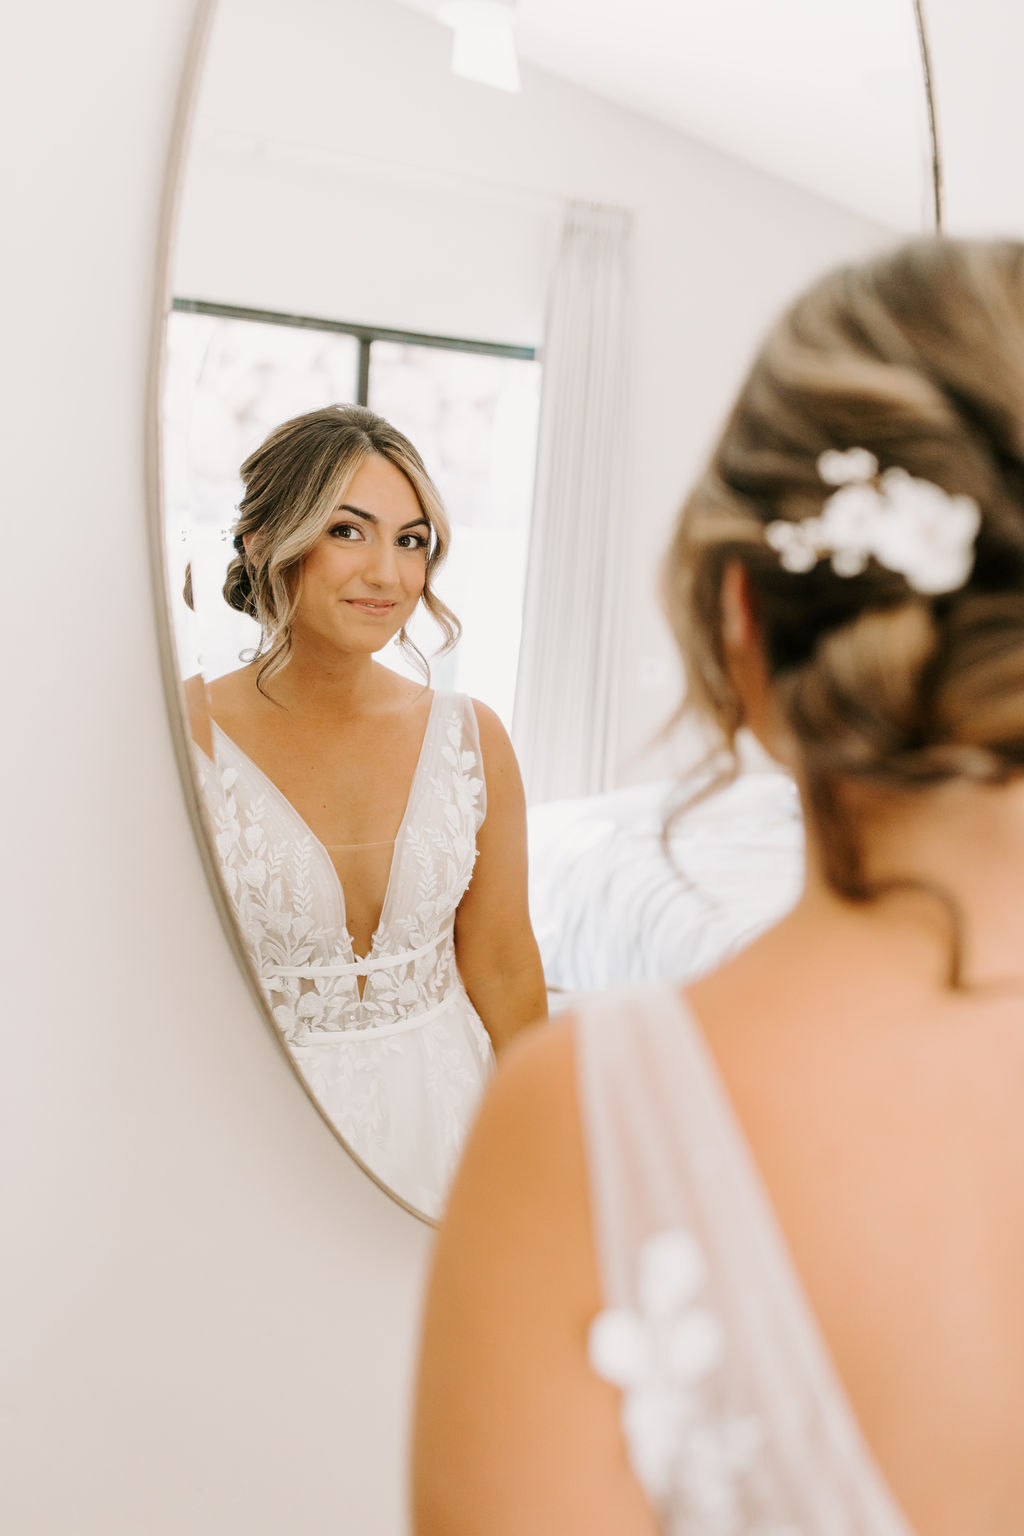 Bride smiling and looking at reflection in mirror 